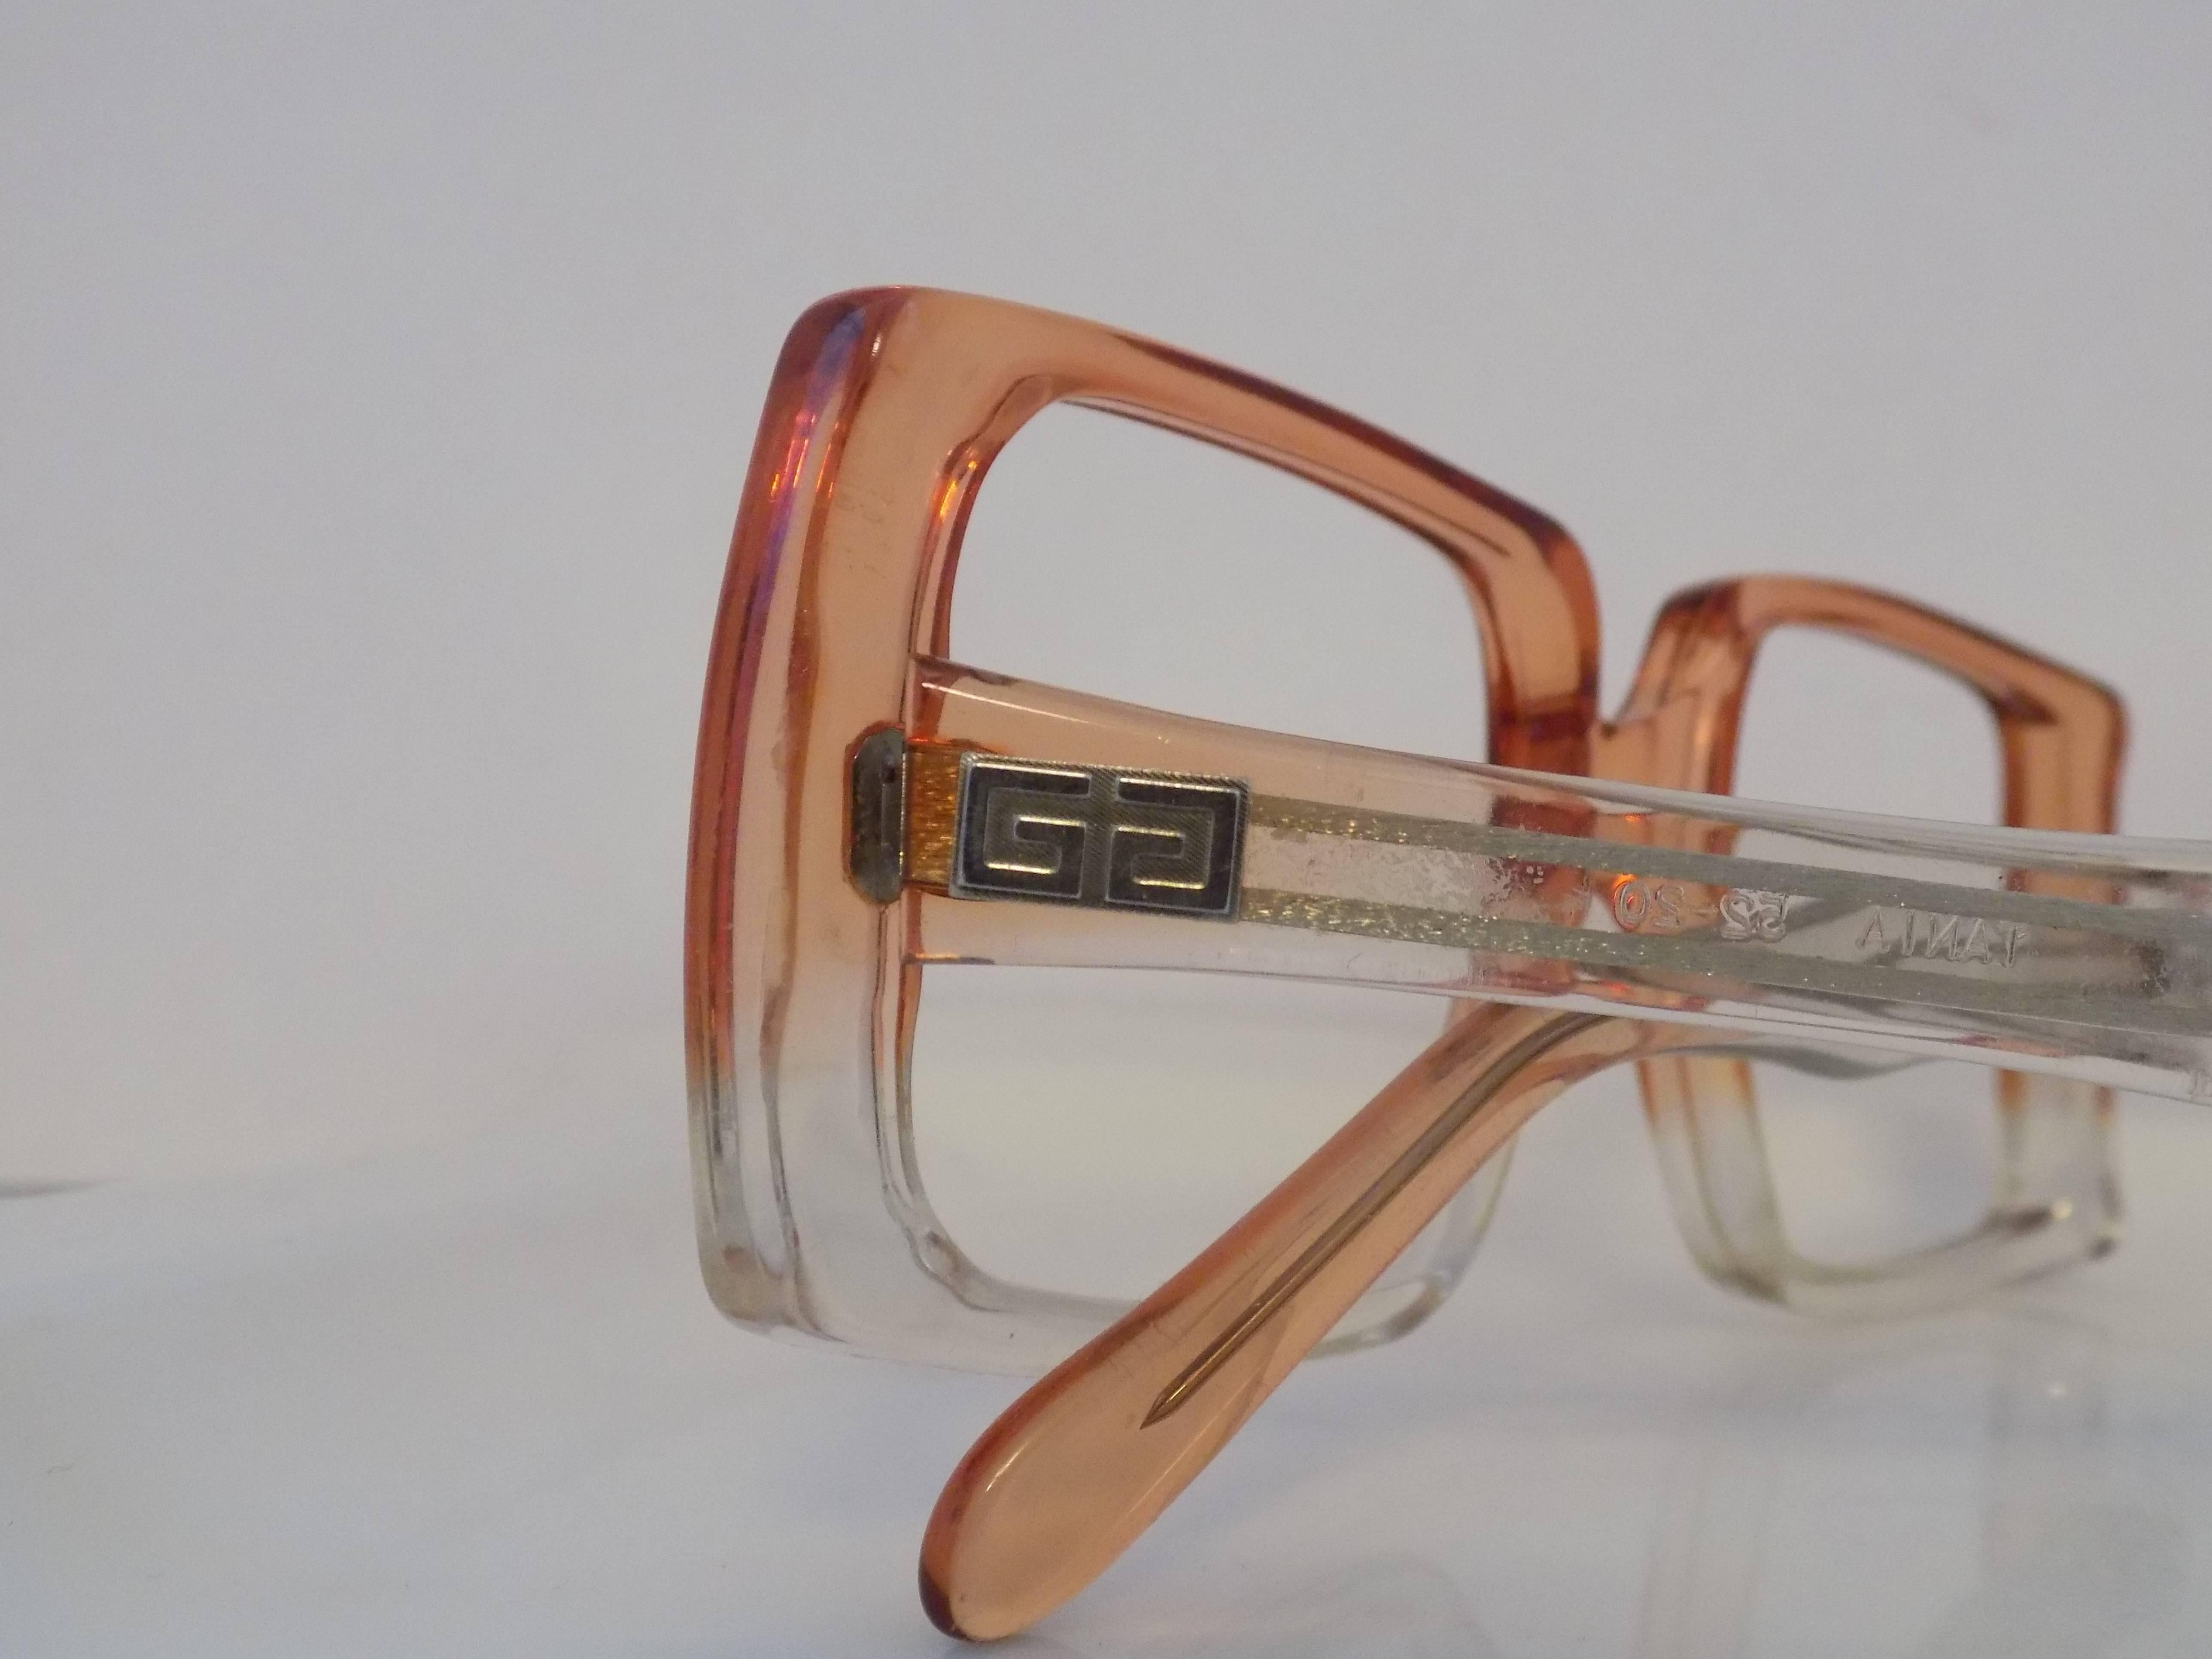 1980s Givenchy Glasses

totally made in italy
unworn